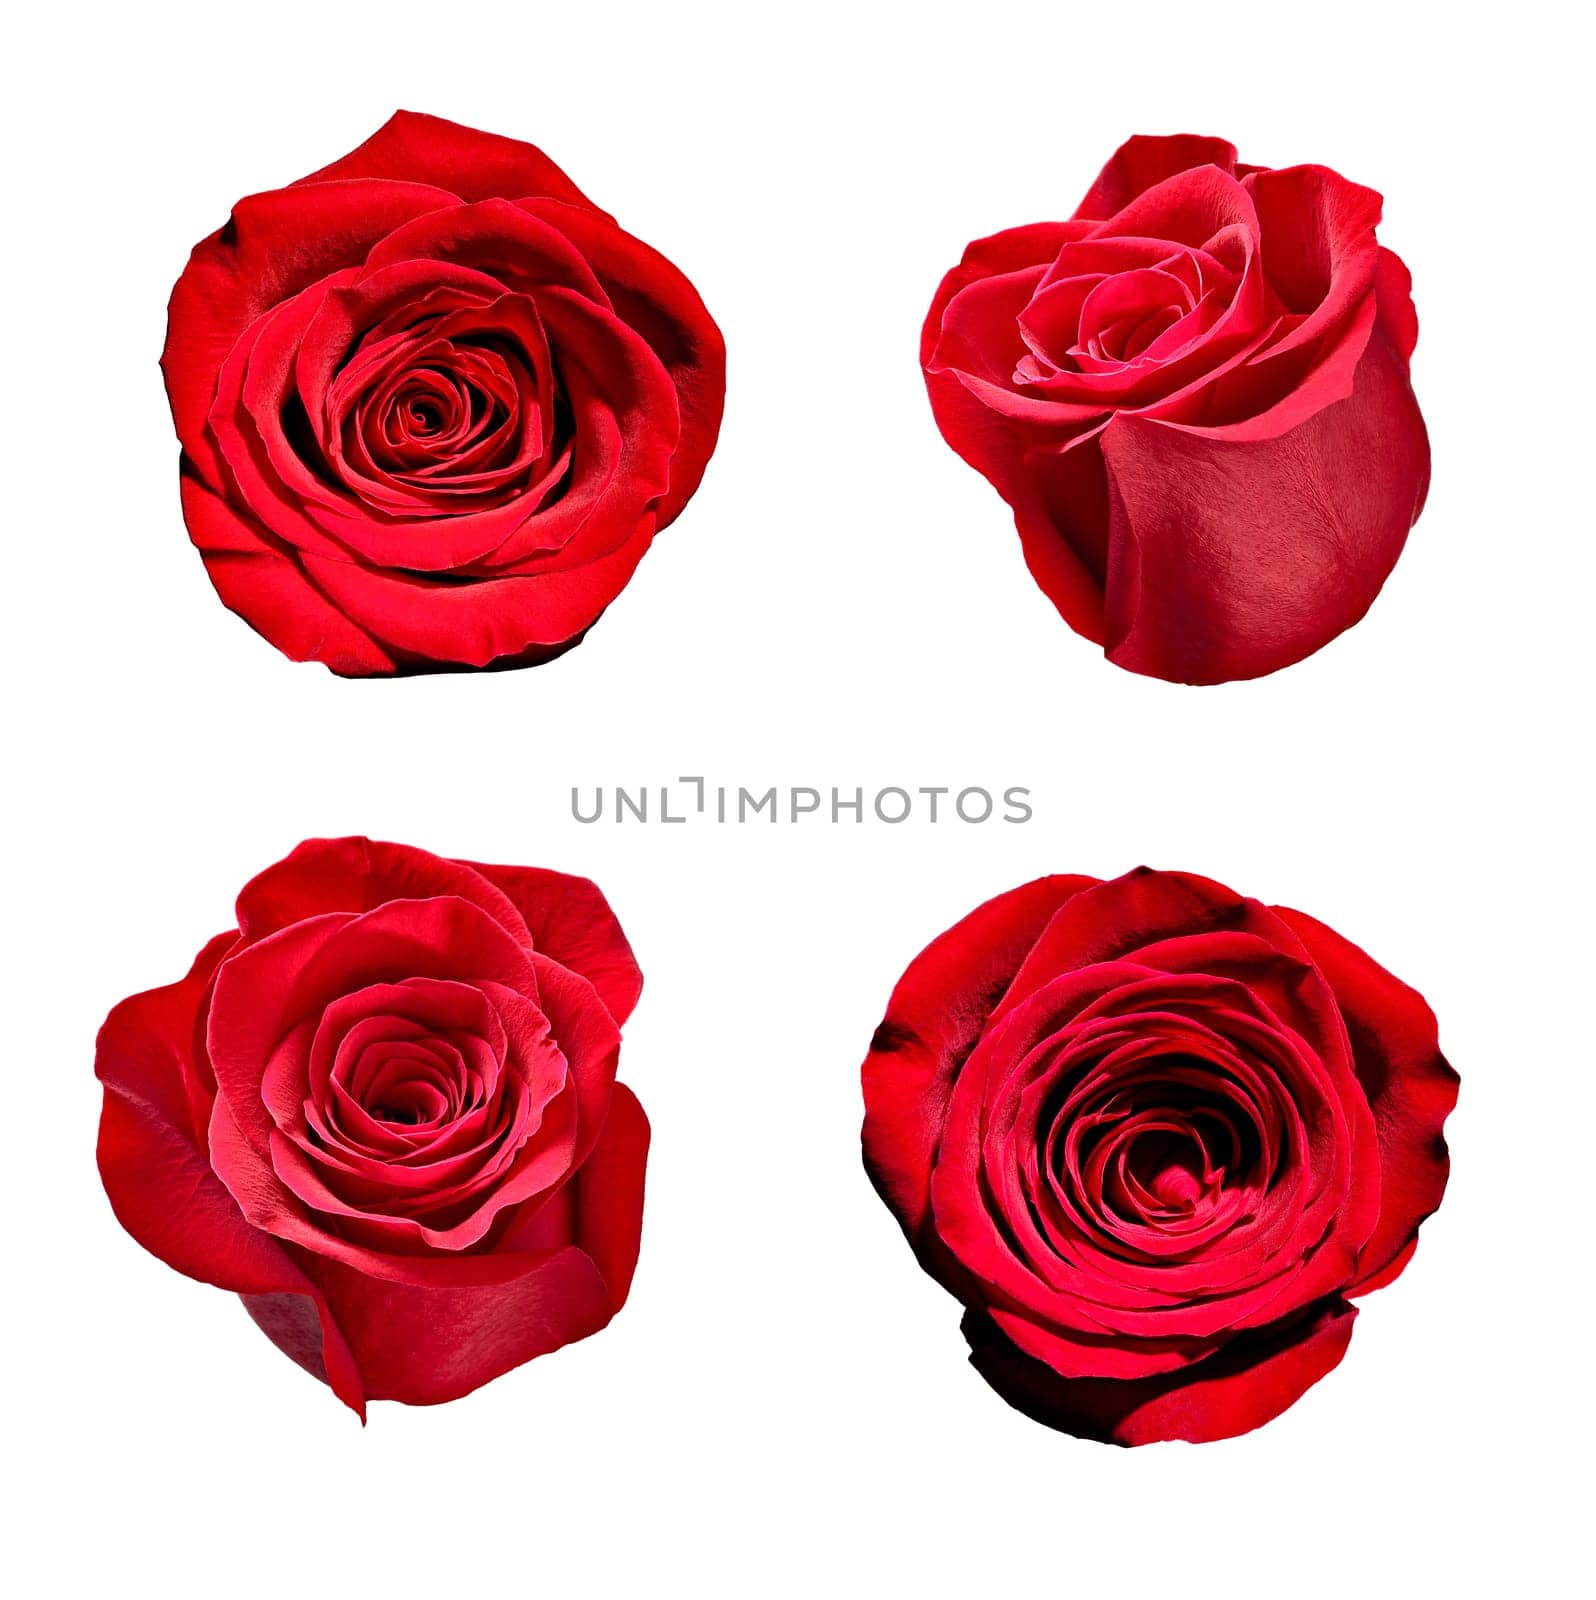 collection of various roses on white background. each one is shot separately